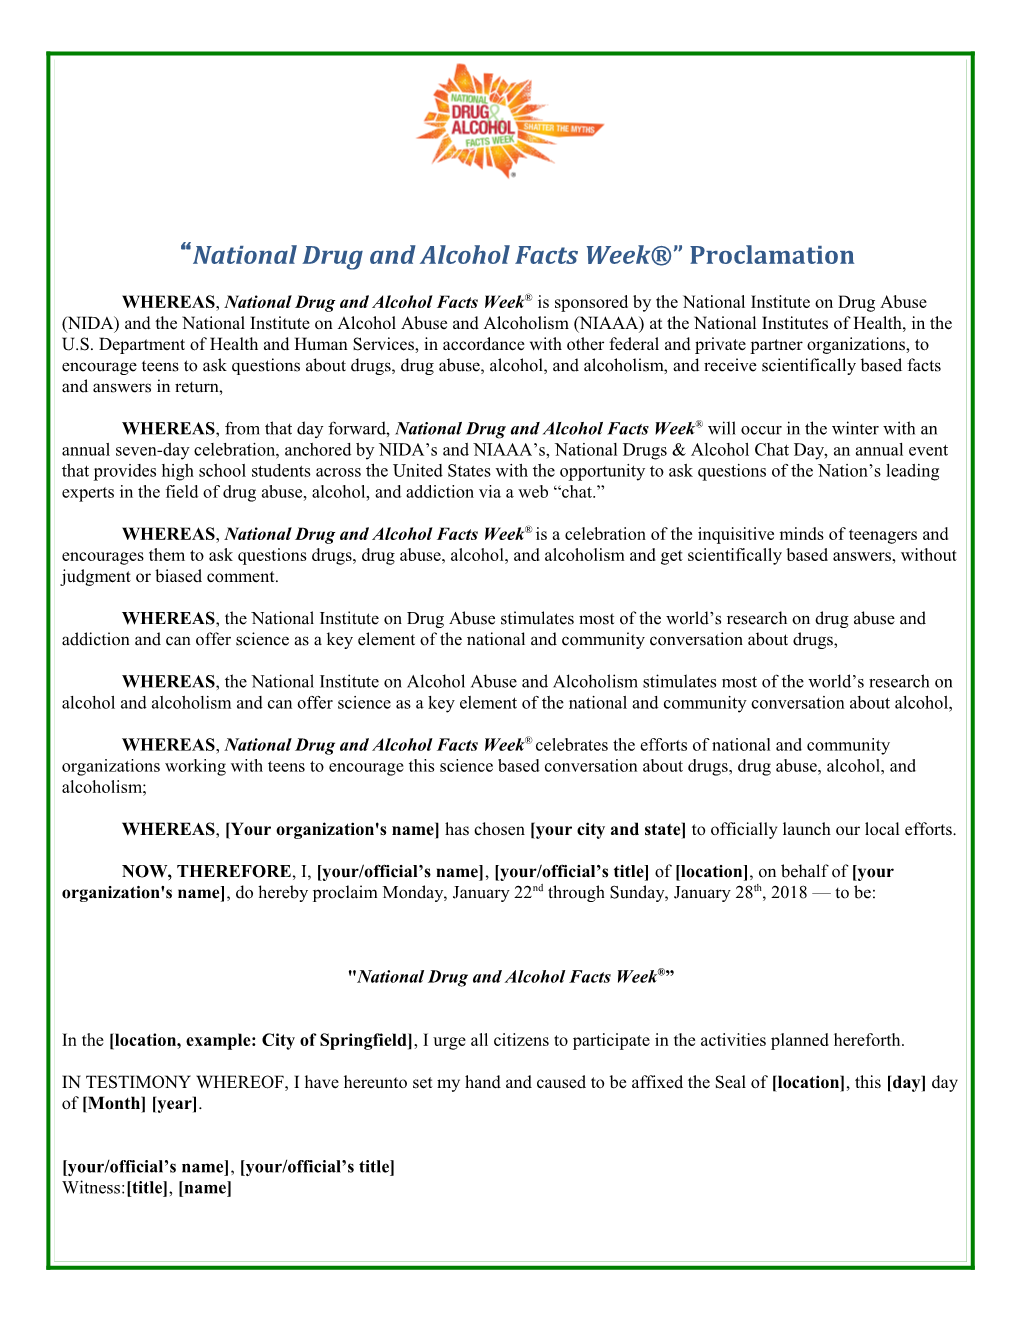 National Drug and Alcohol Facts Week Proclamation